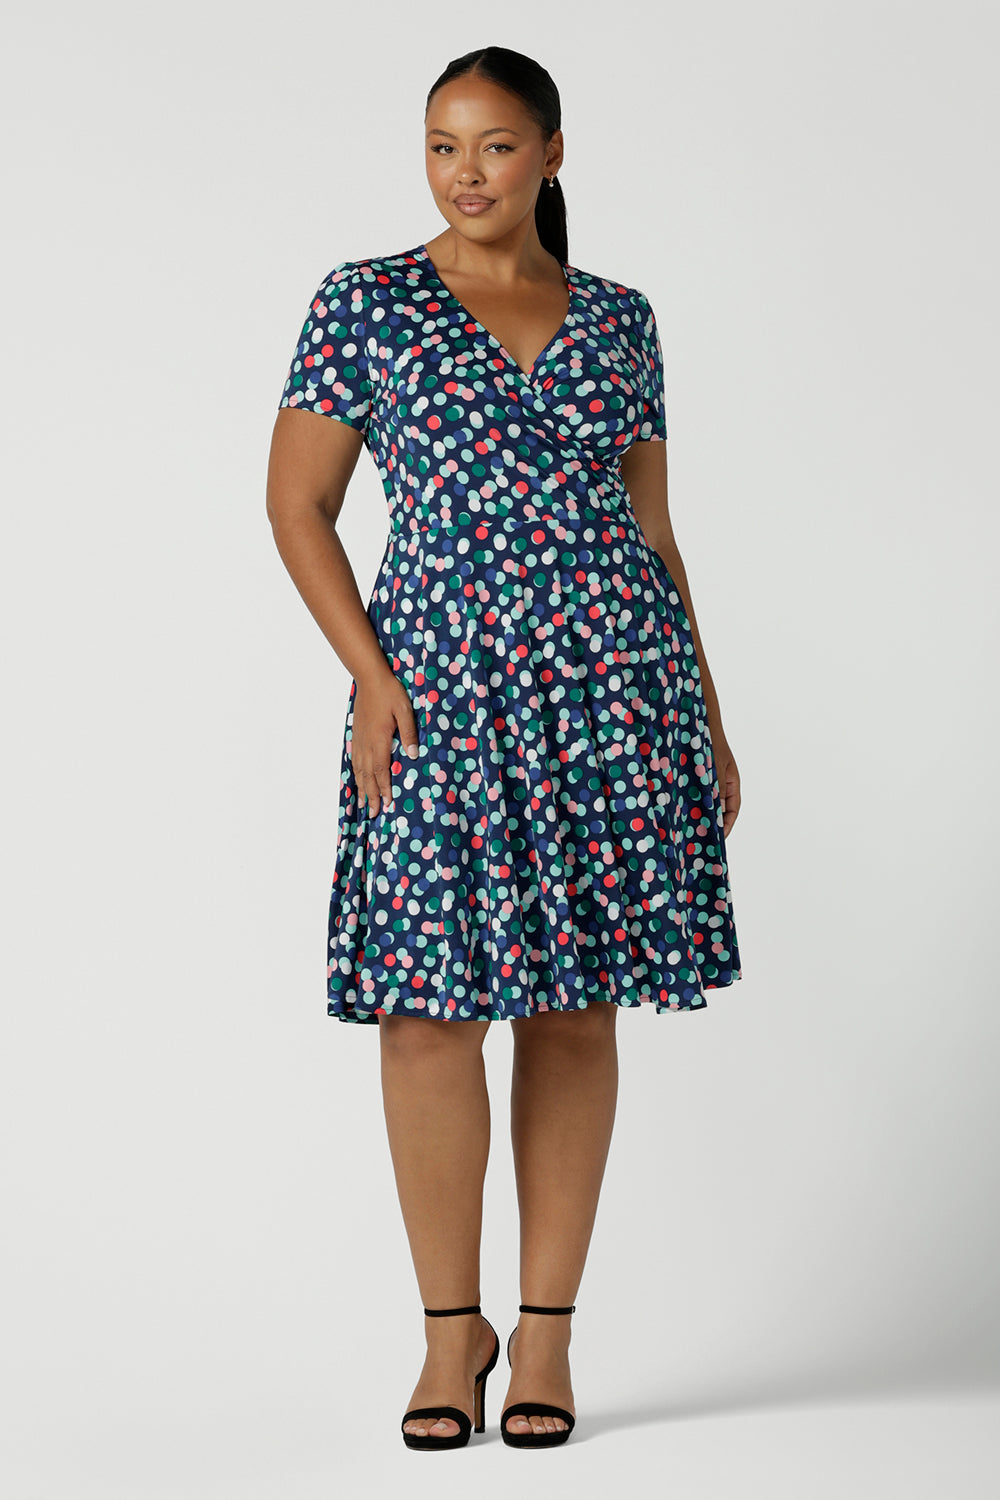 Curvy size 16 woman wears a Bubbles printed Jersey dress with a fixed wrap in a midi length. Styled back with a black heel. Perfect for work to weekend looks. Made in Australia for women size 8 - 24.